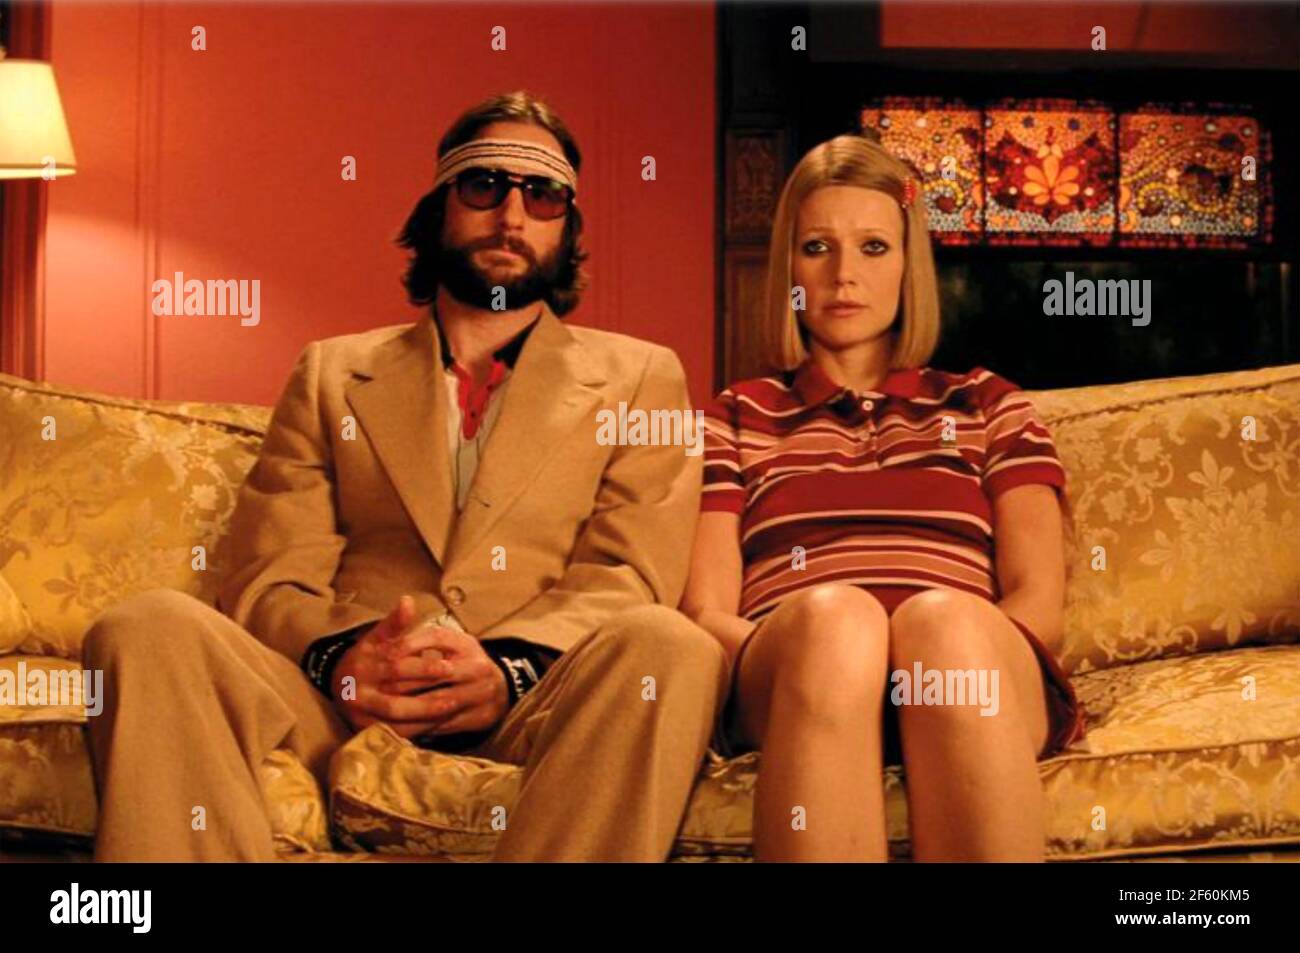 The Royal Tenenbaums 2001 Buena Vista Pictures Film With Gwyneth Paltrow And Luke Wilson Stock